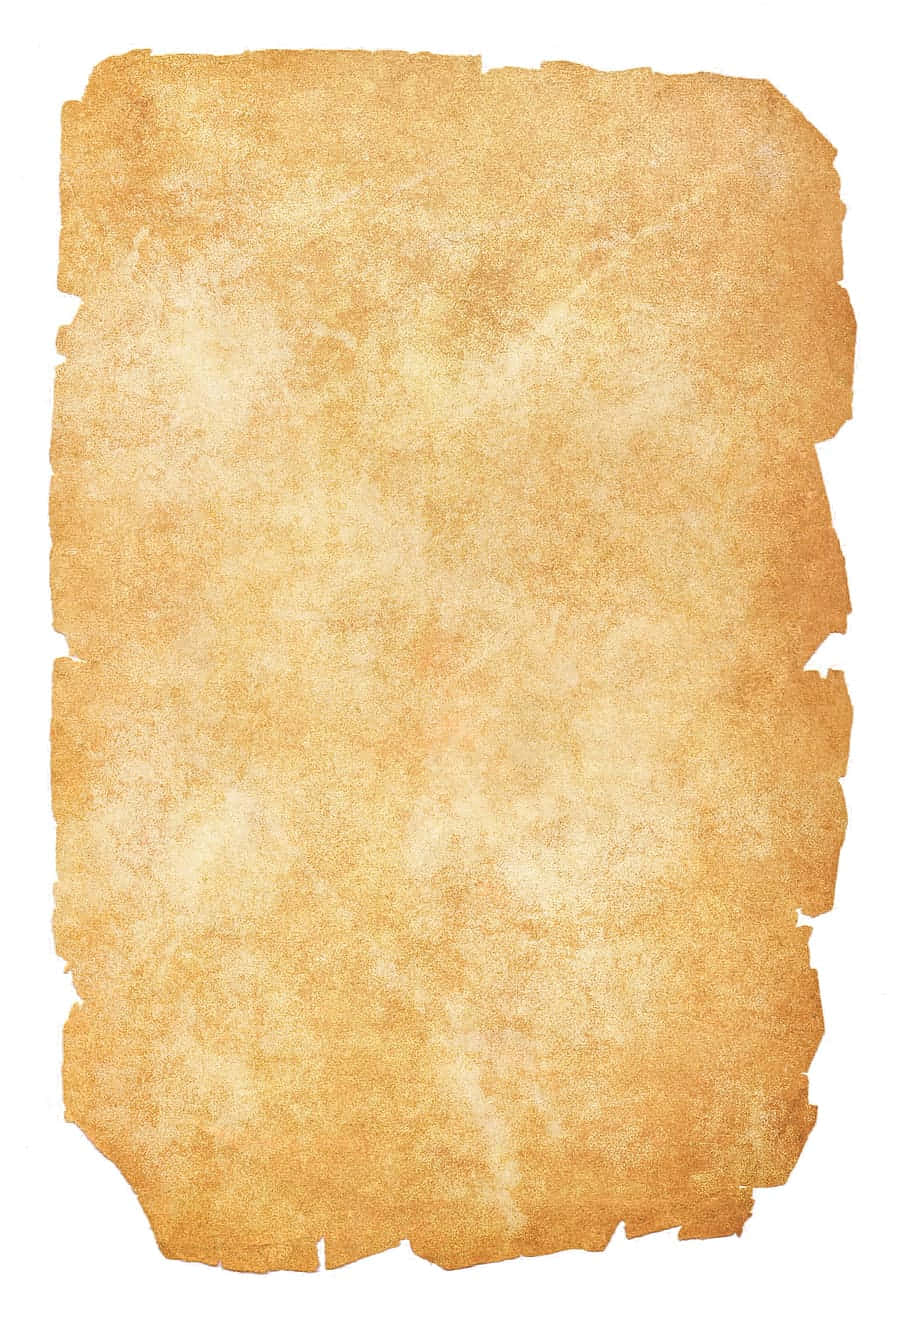 Old Torn Parchment Paper Wallpaper